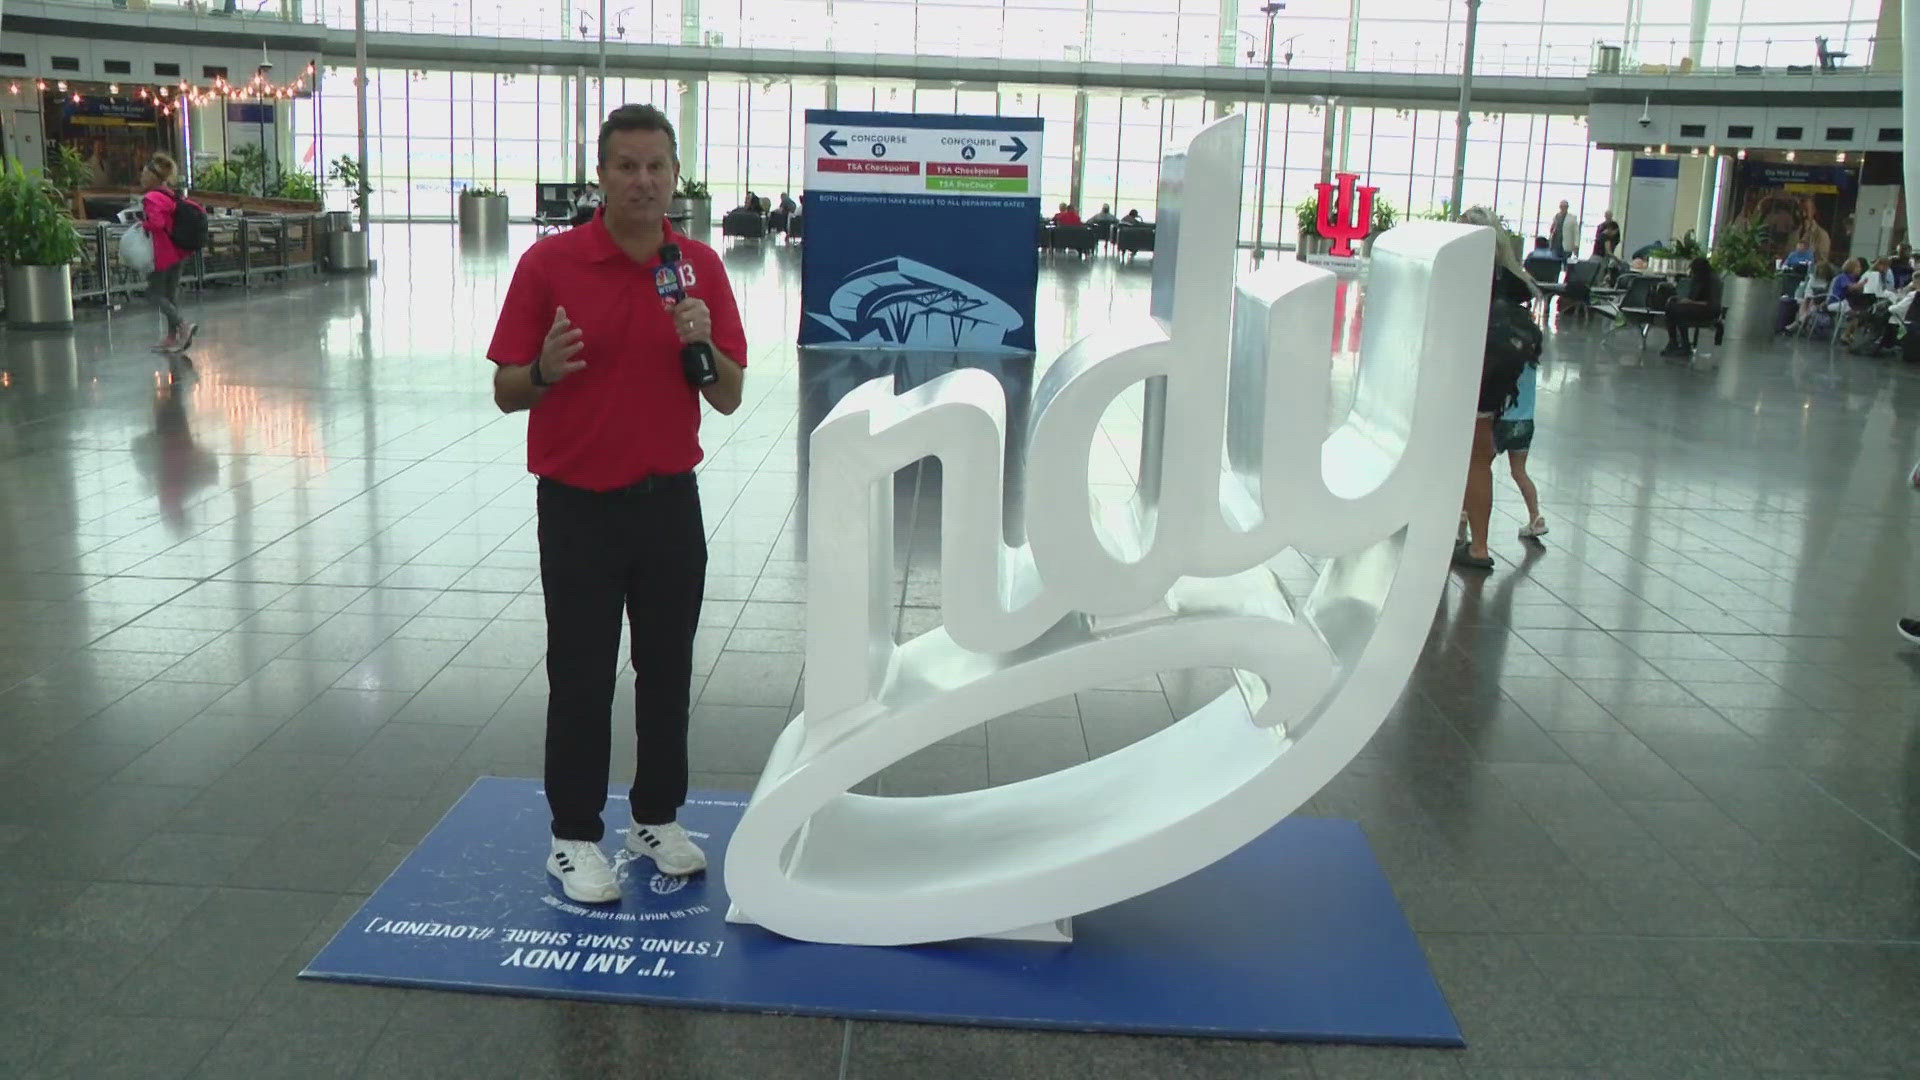 13Sports director Dave Calabro visited the Indianapolis International Airport on one of the busiest travel weekends during his weekly quest to find some Good News!